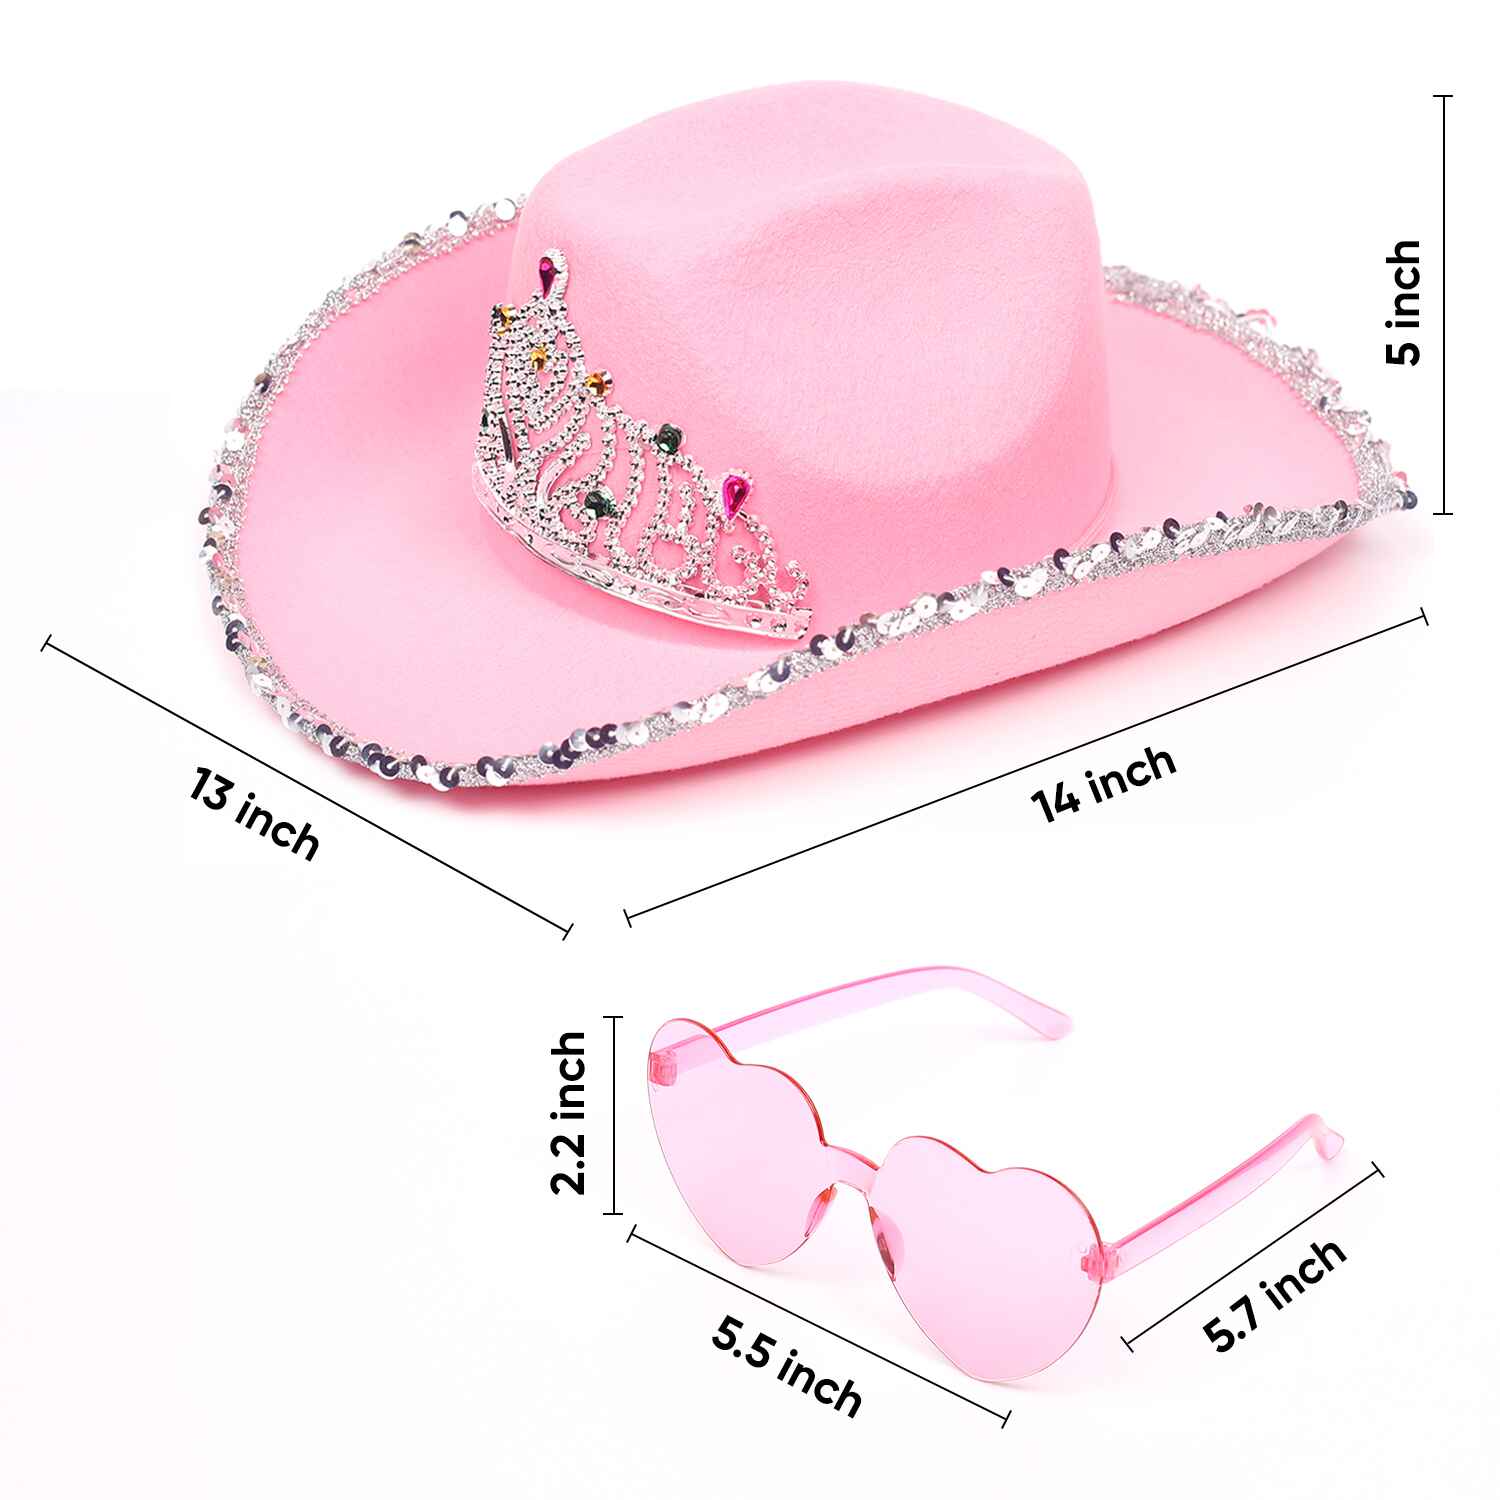  Pink Cowgirl Hat for women pink cowboy hat space cowgirl hat tiara crown fluffy halloween